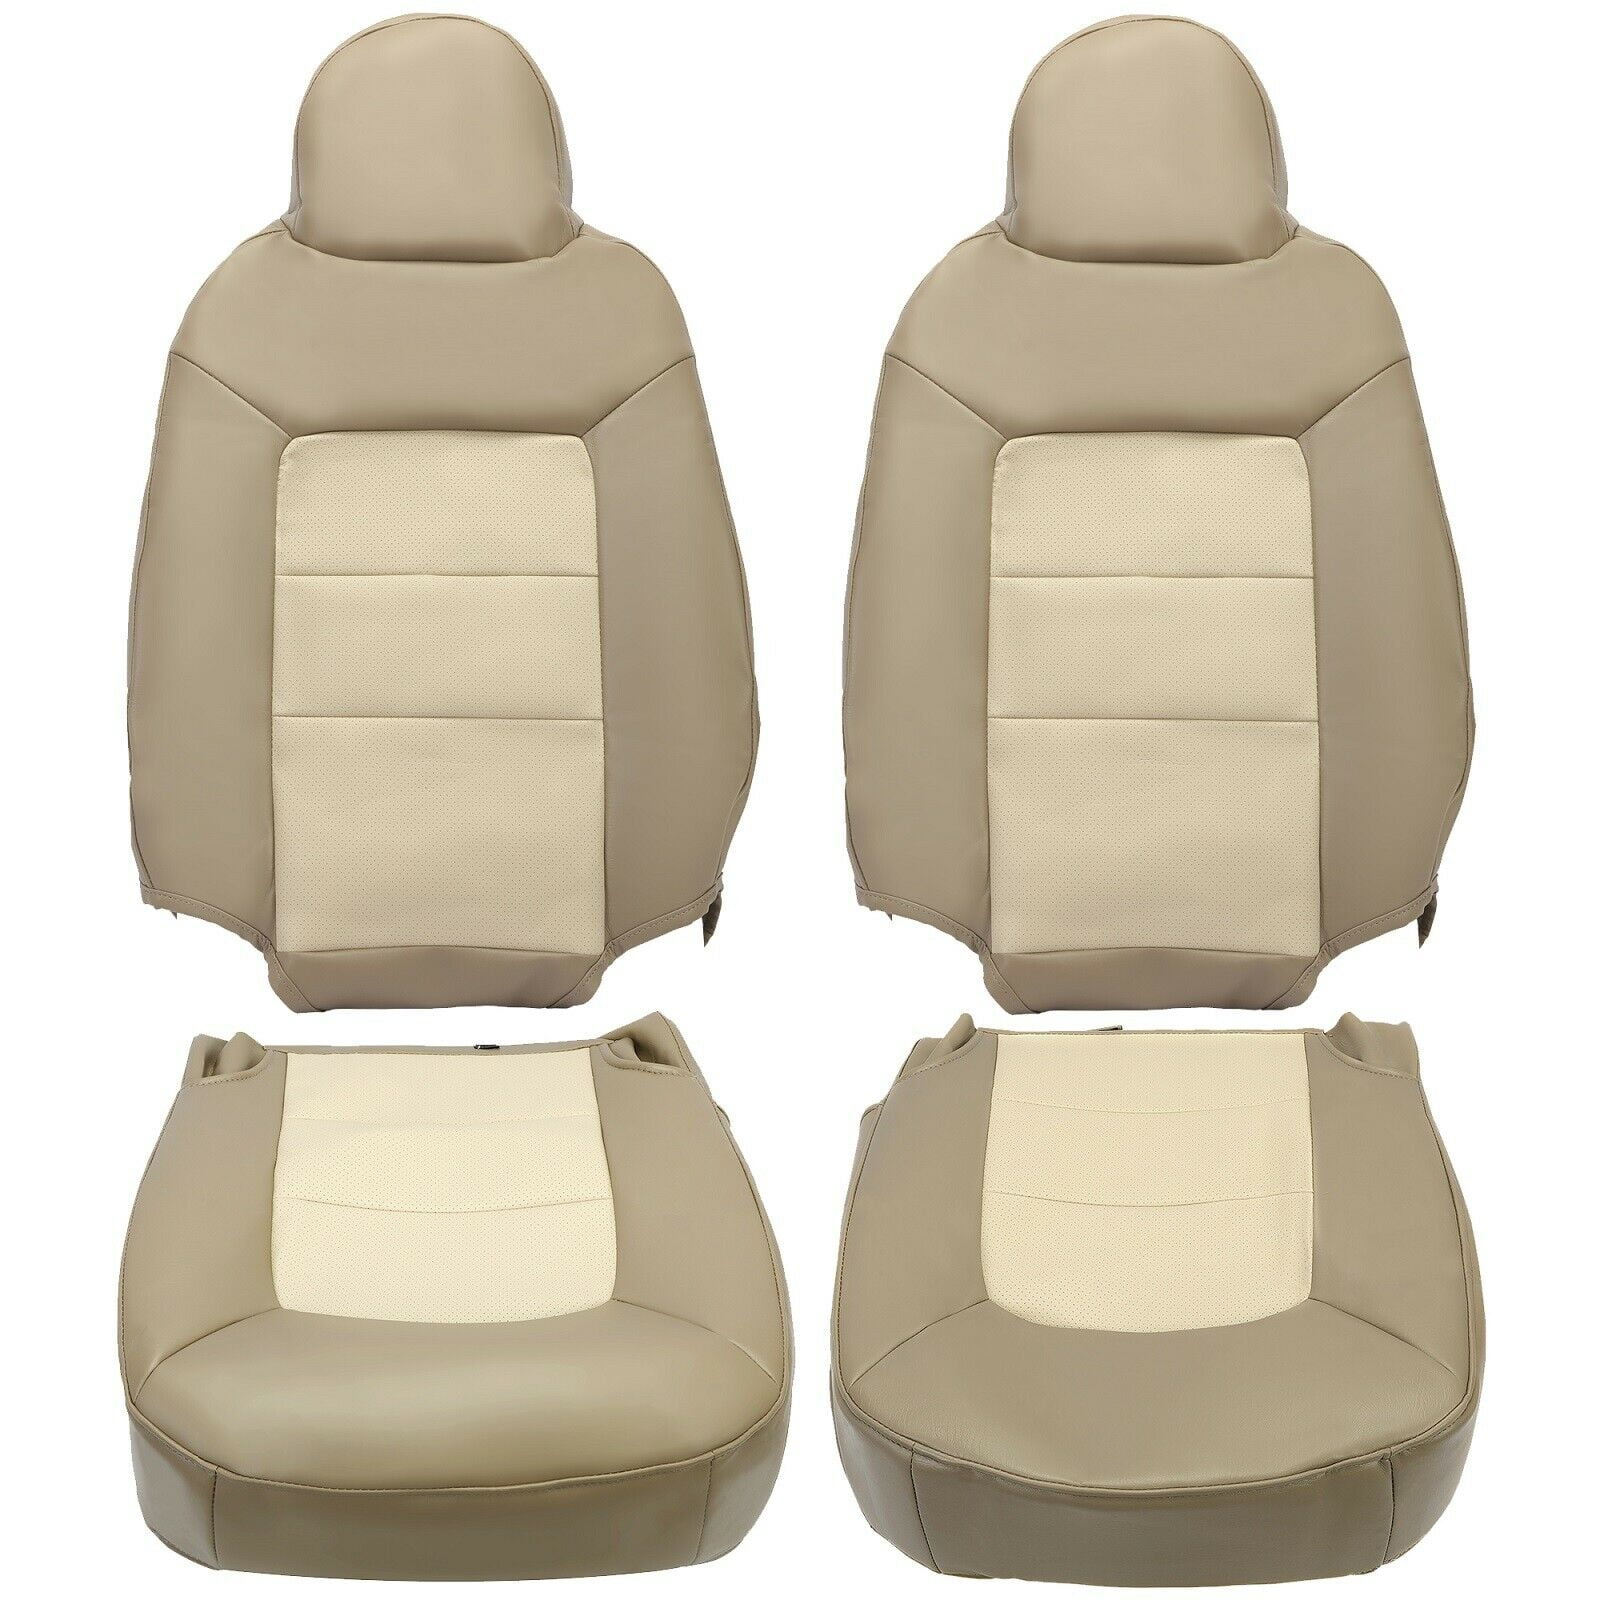 2003 2004 Lincoln Navigator Luxury Driver Side Bottom Leather Seat Cover TAN